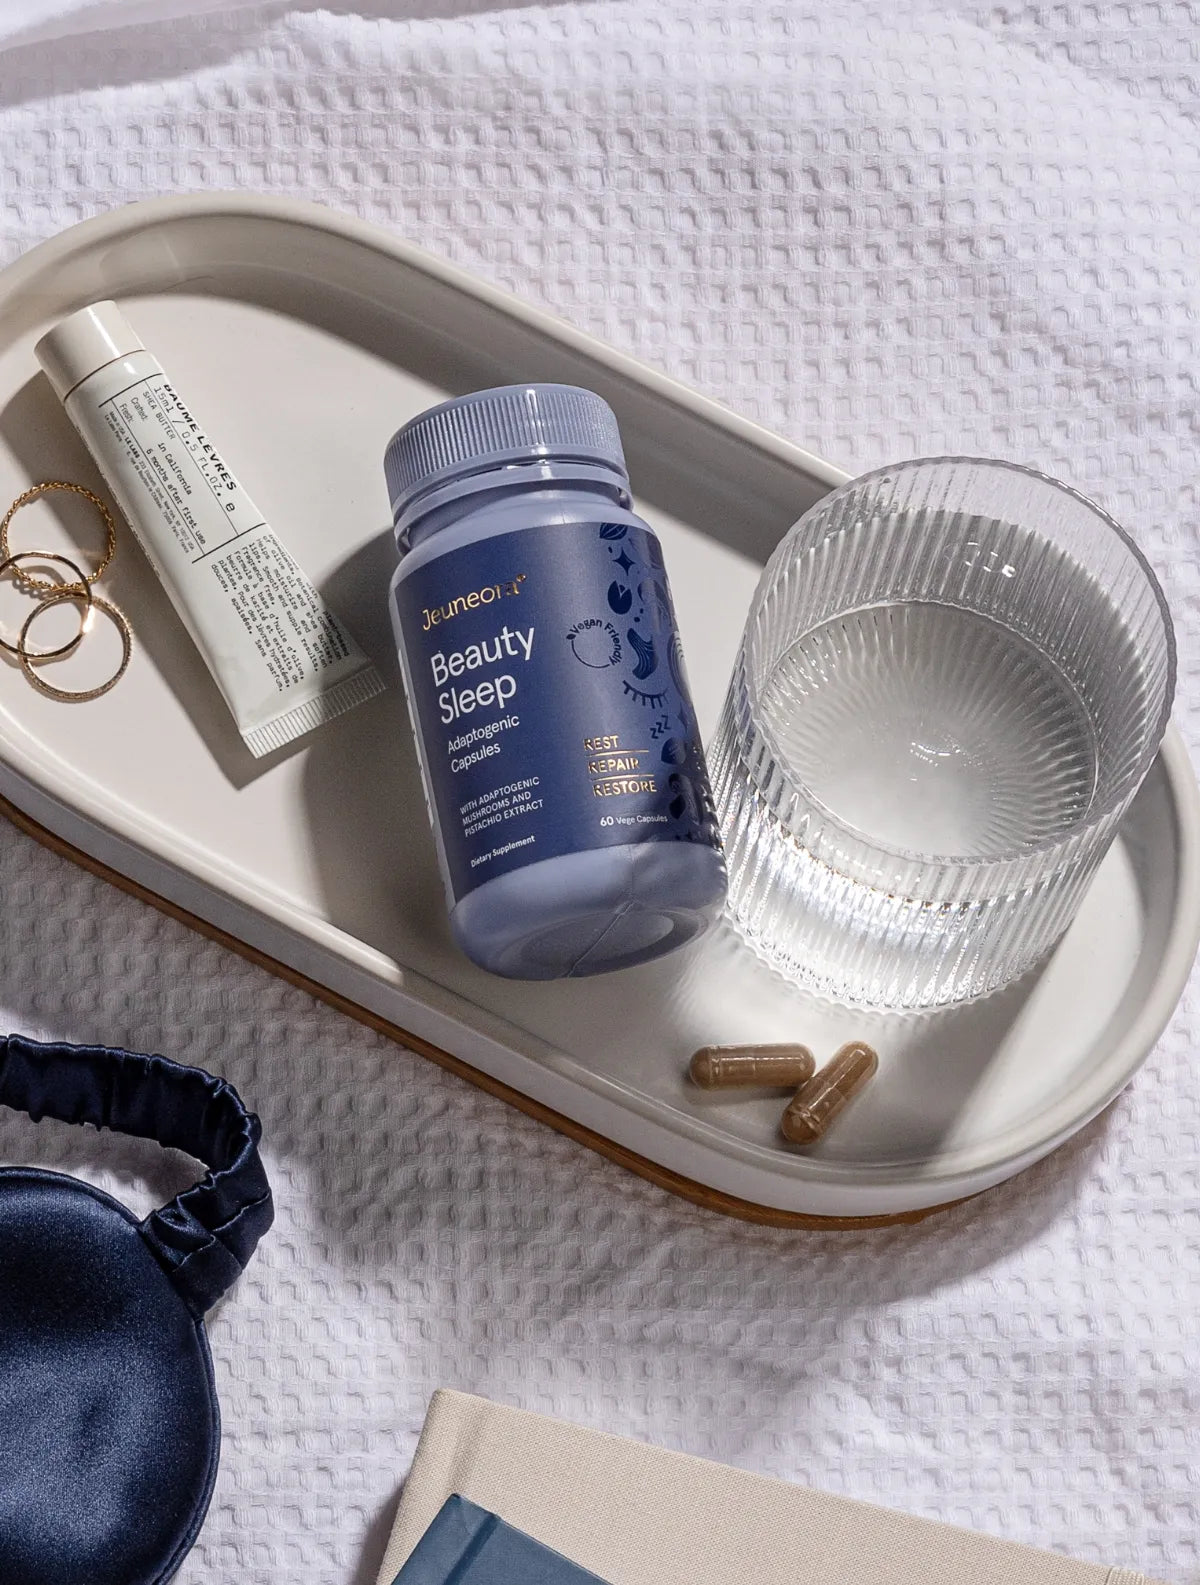 Jeuneora-Beauty-Sleep-Capsules layout on bedside table for evening routine